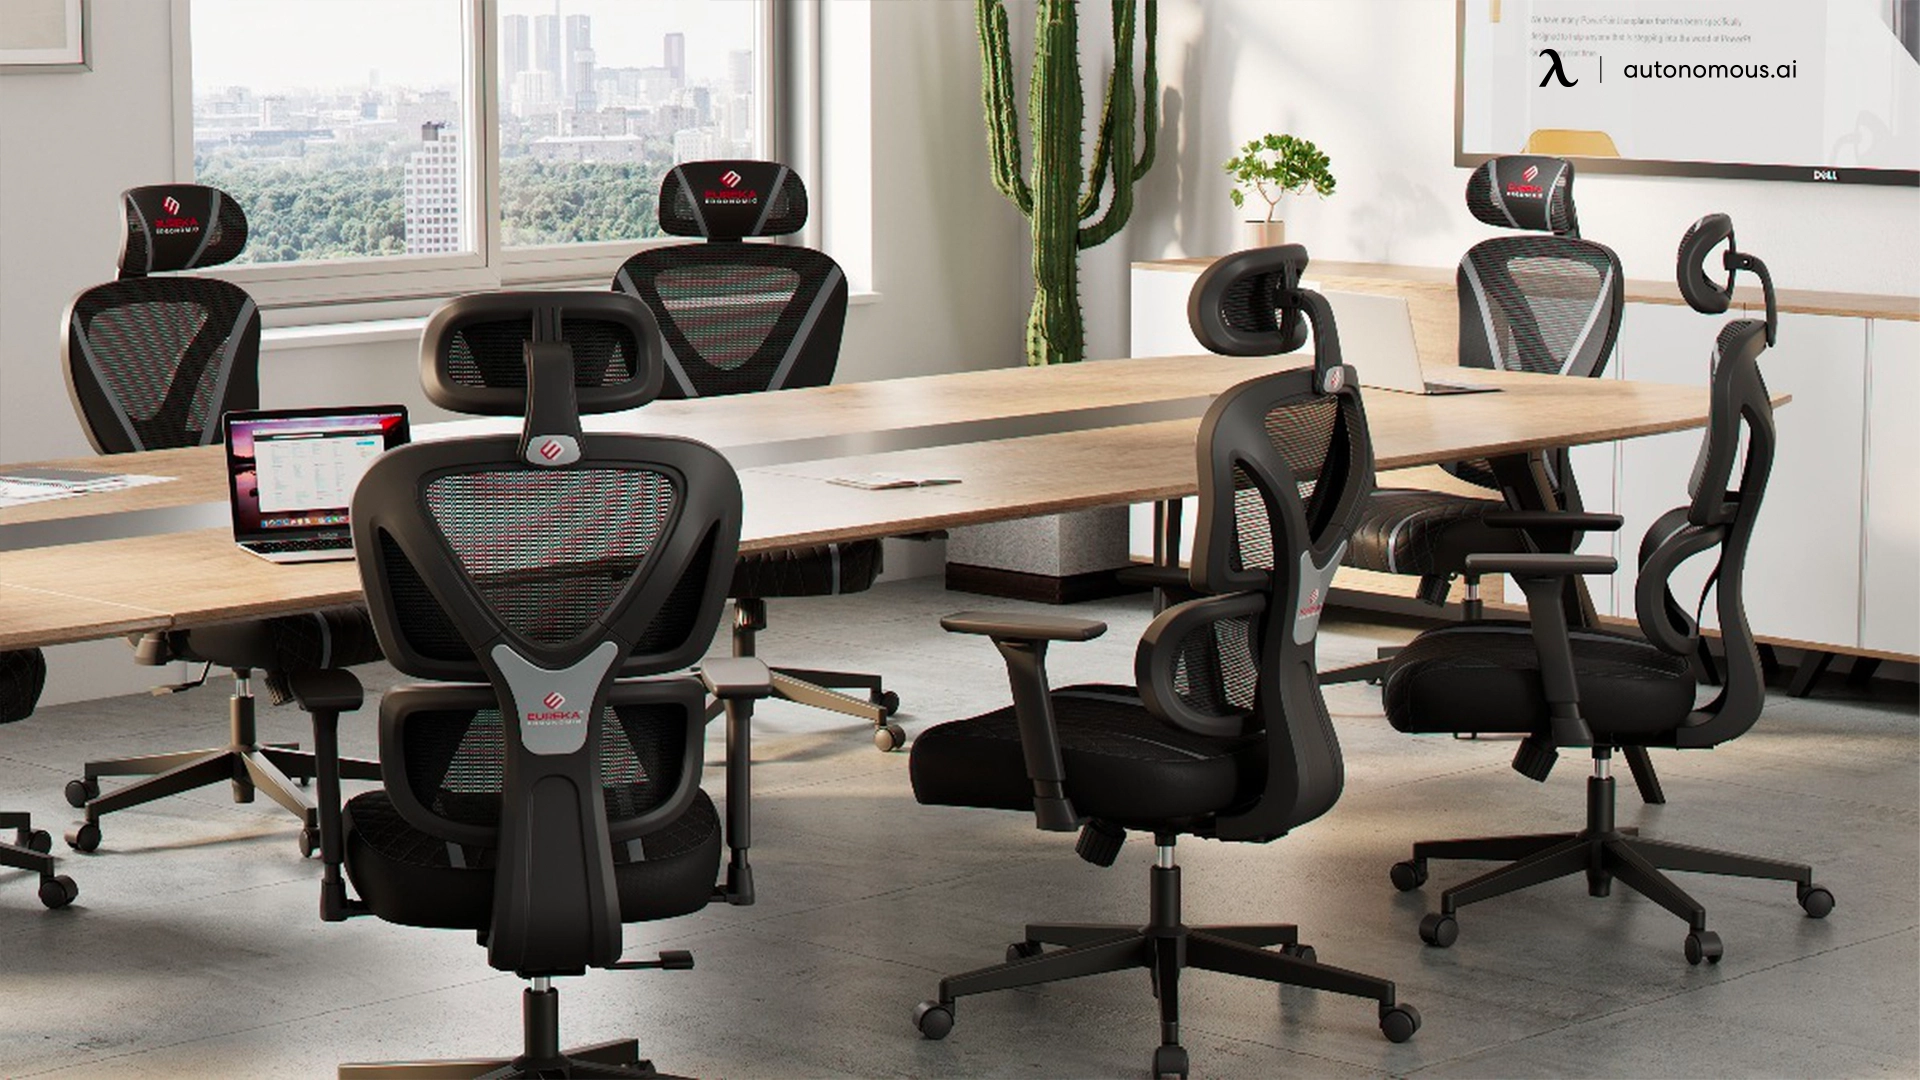 Why Should You Invest in a EUREKA ERGONOMIC Chair?